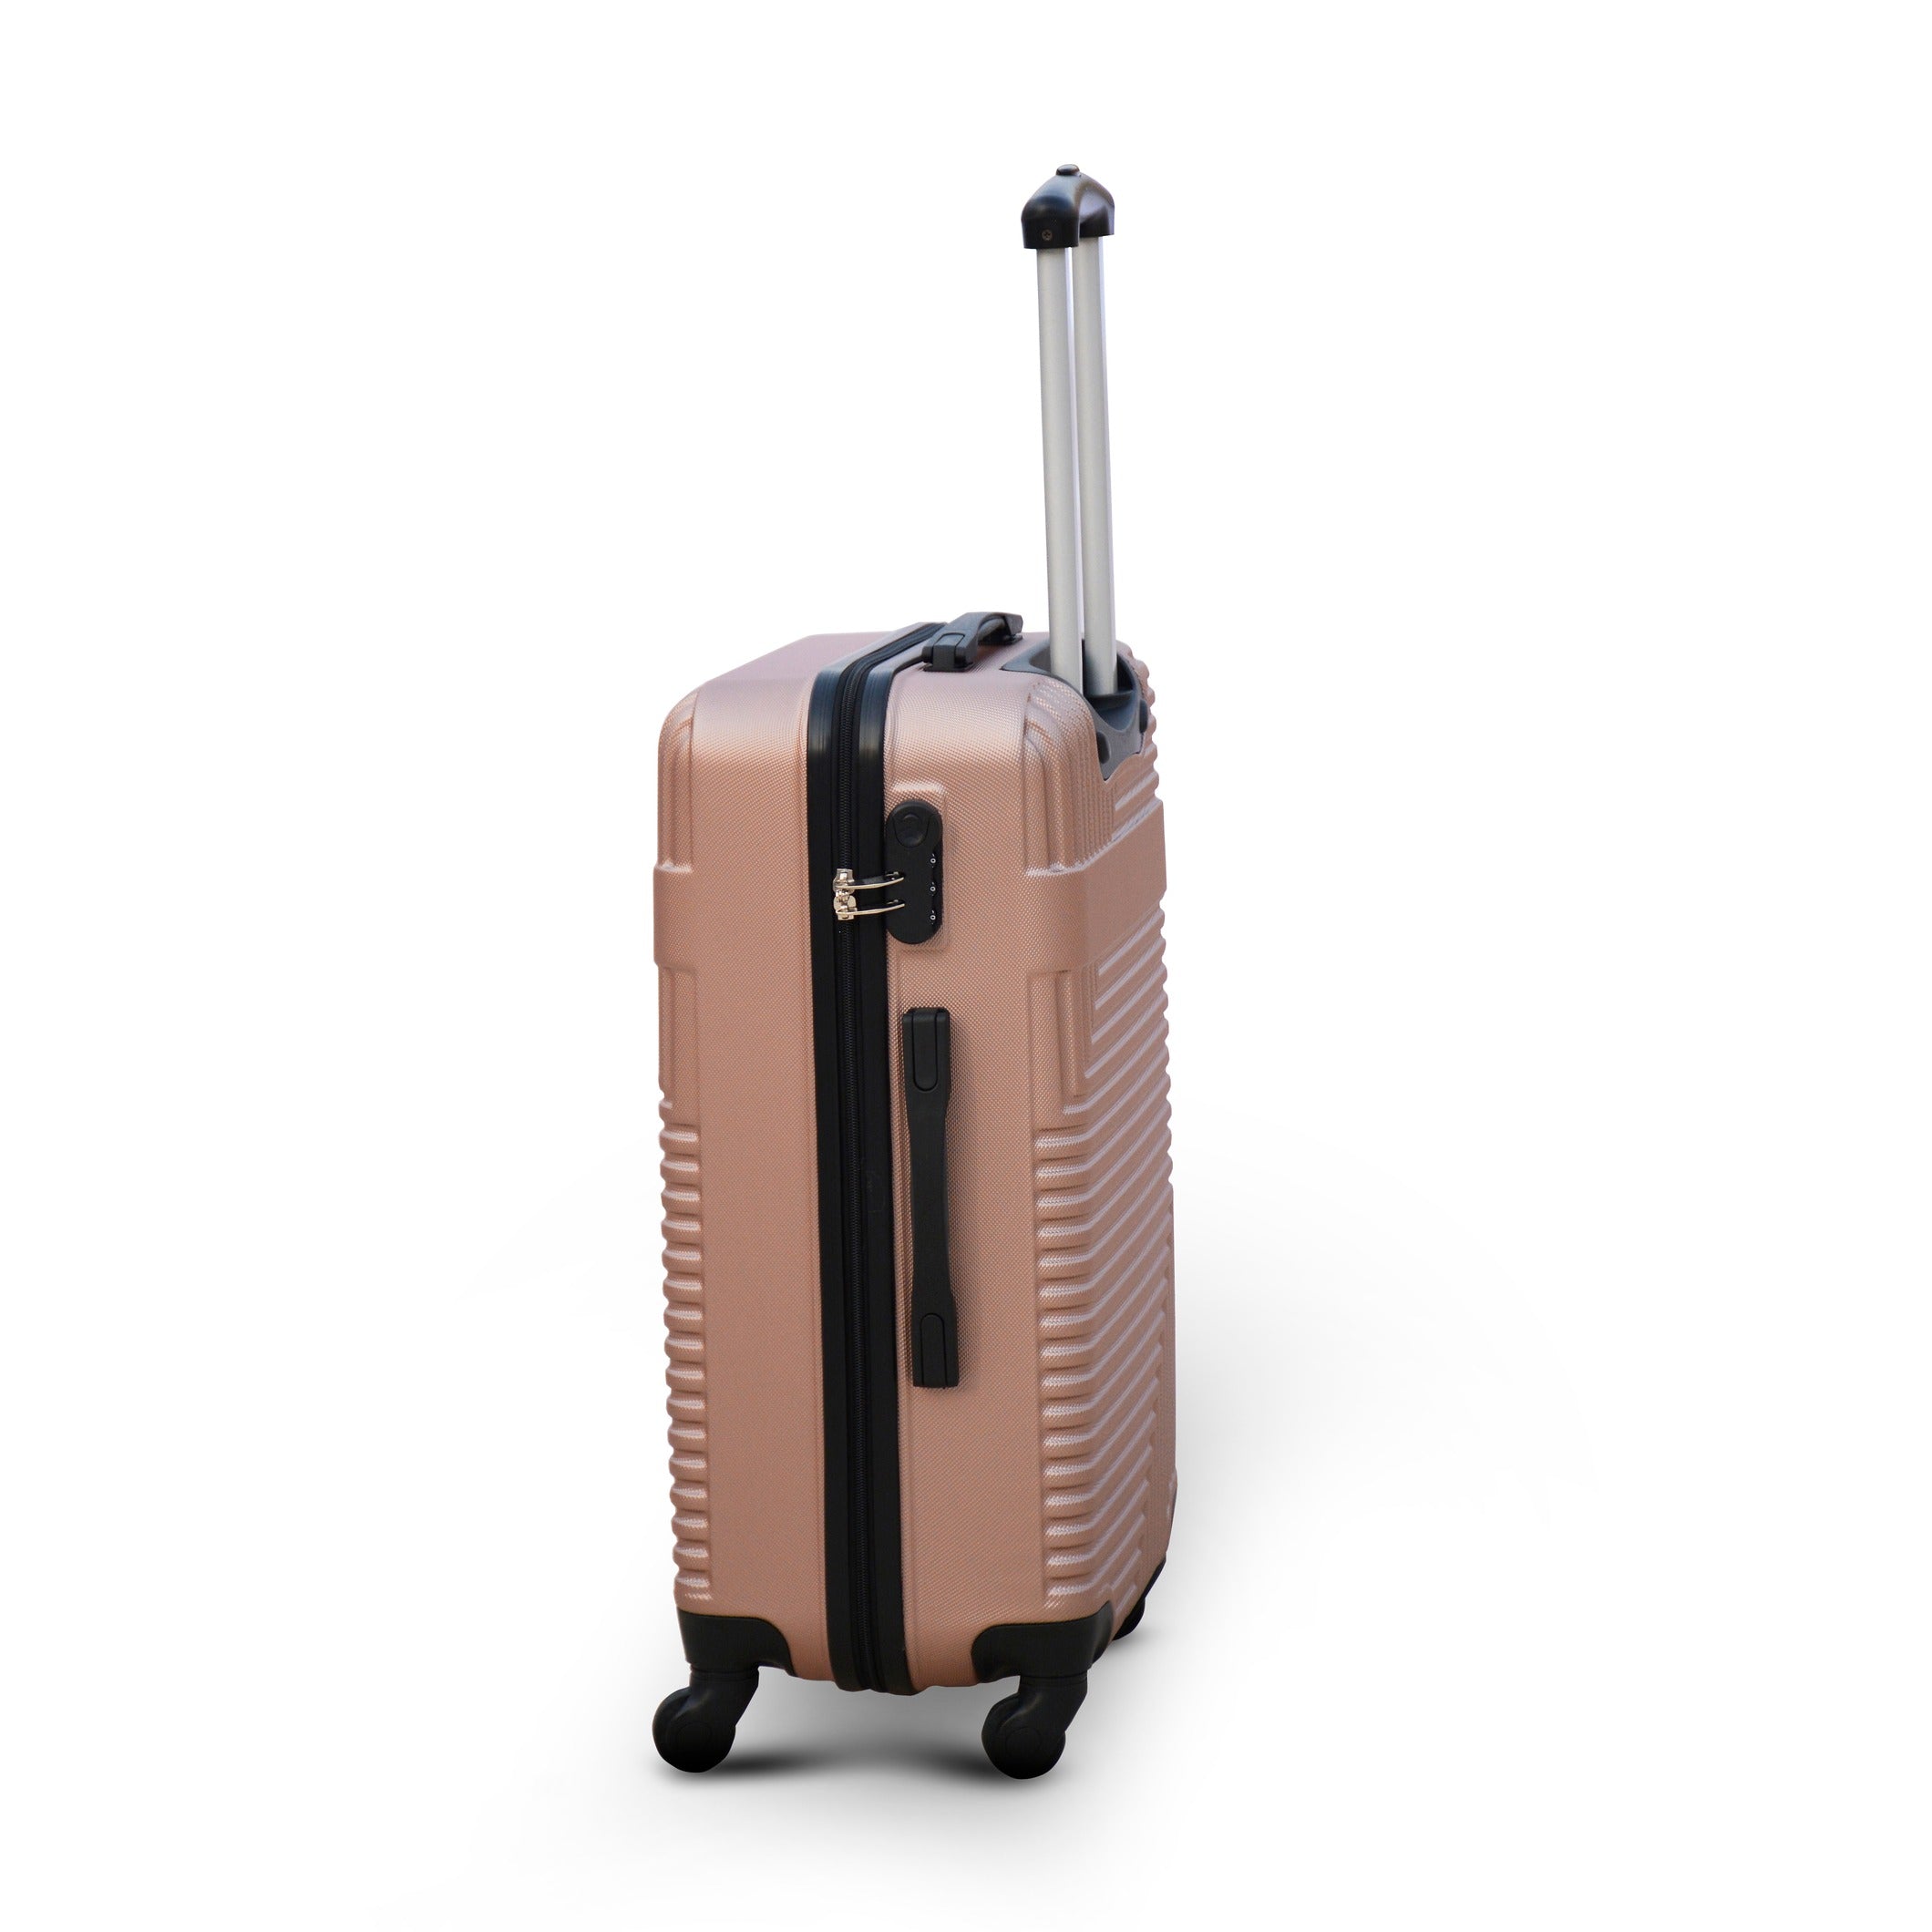 20" Rose Gold Travel Way ABS Lightweight Luggage Bag With Spinner Wheel